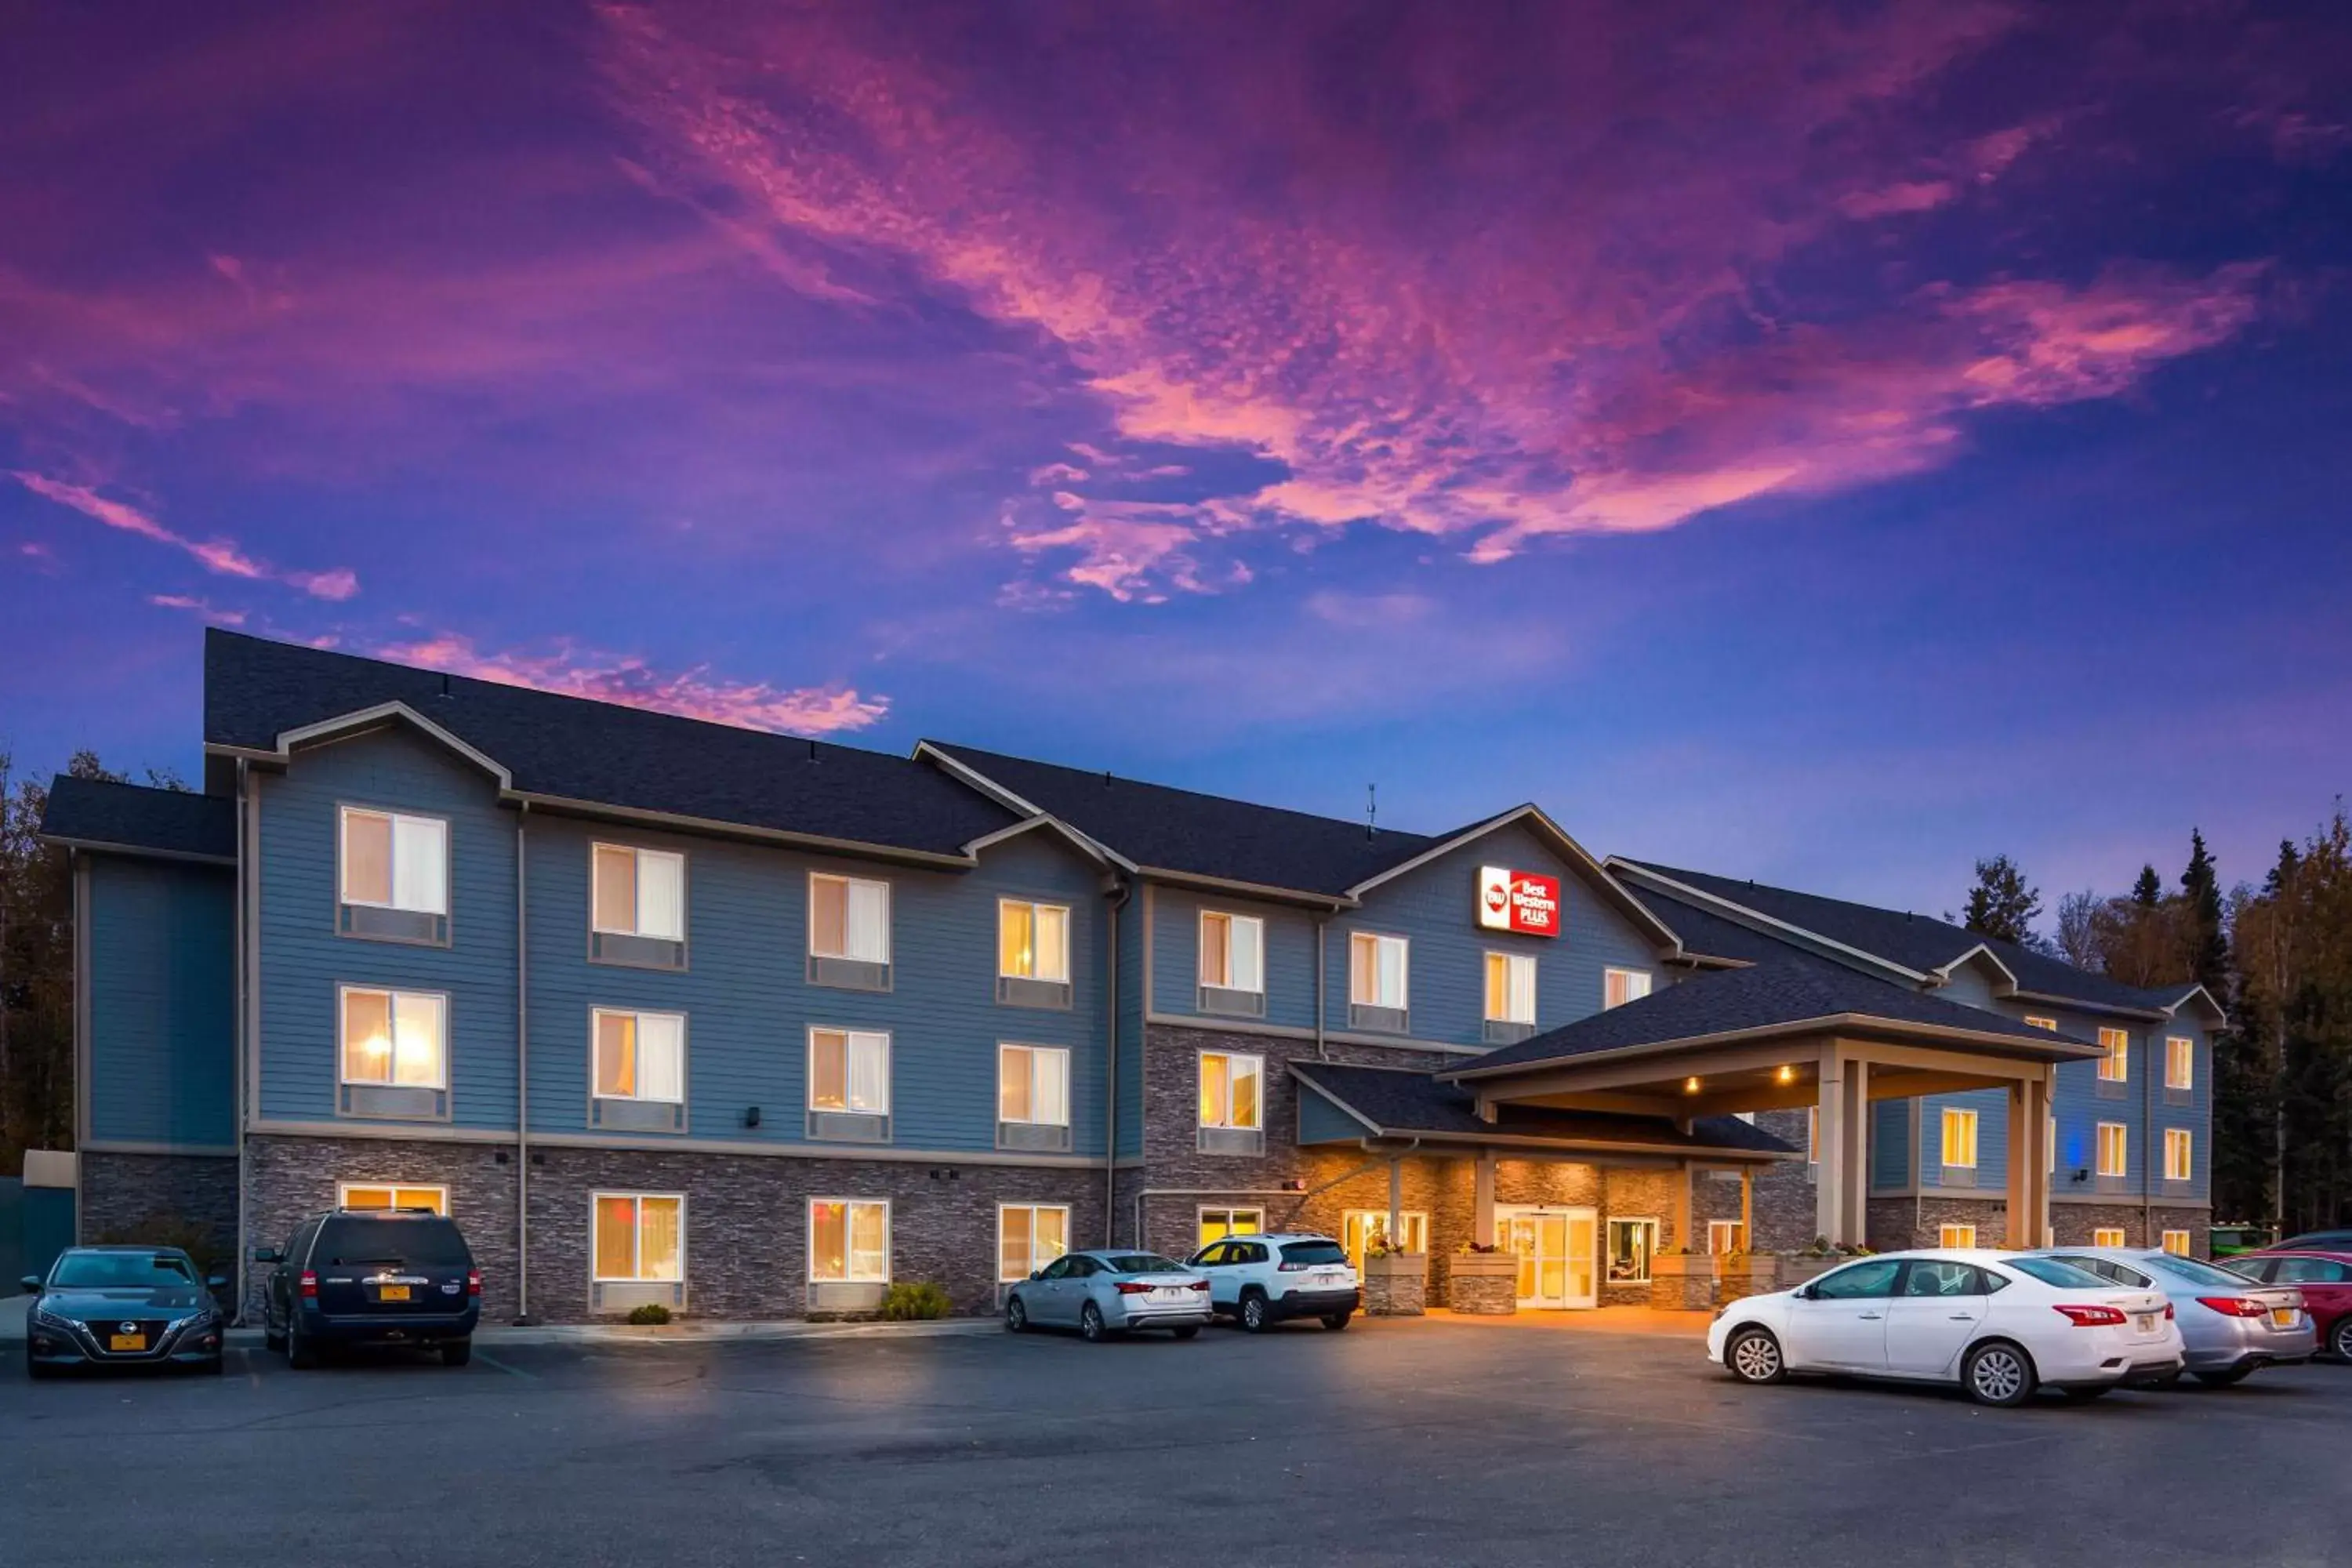 Property Building in Best Western Plus Chena River Lodge